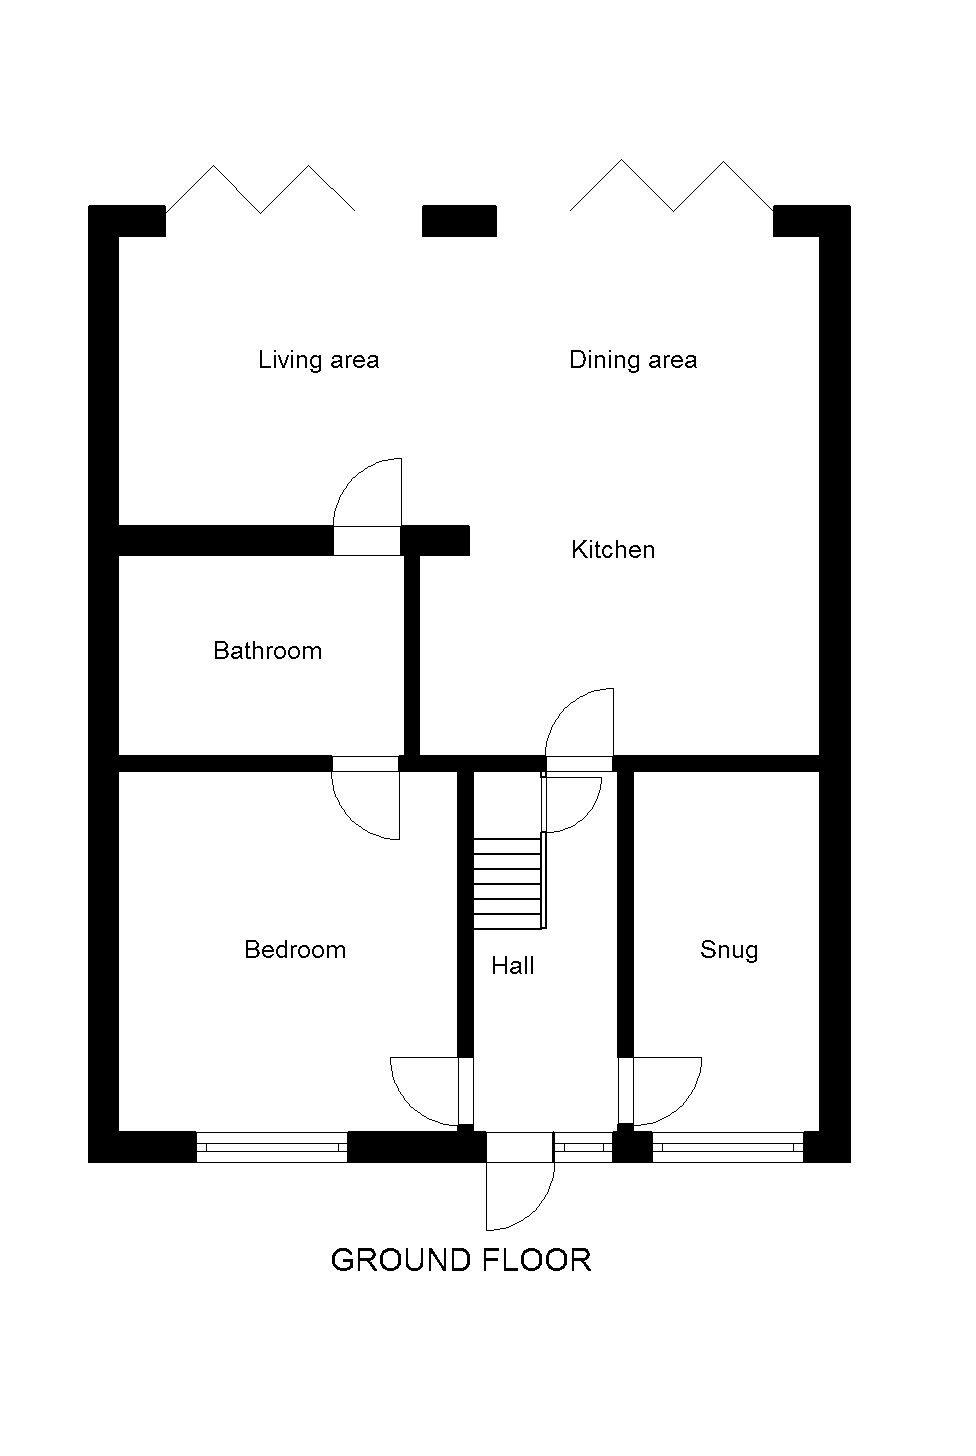 Ground floor plan for accessible renovation